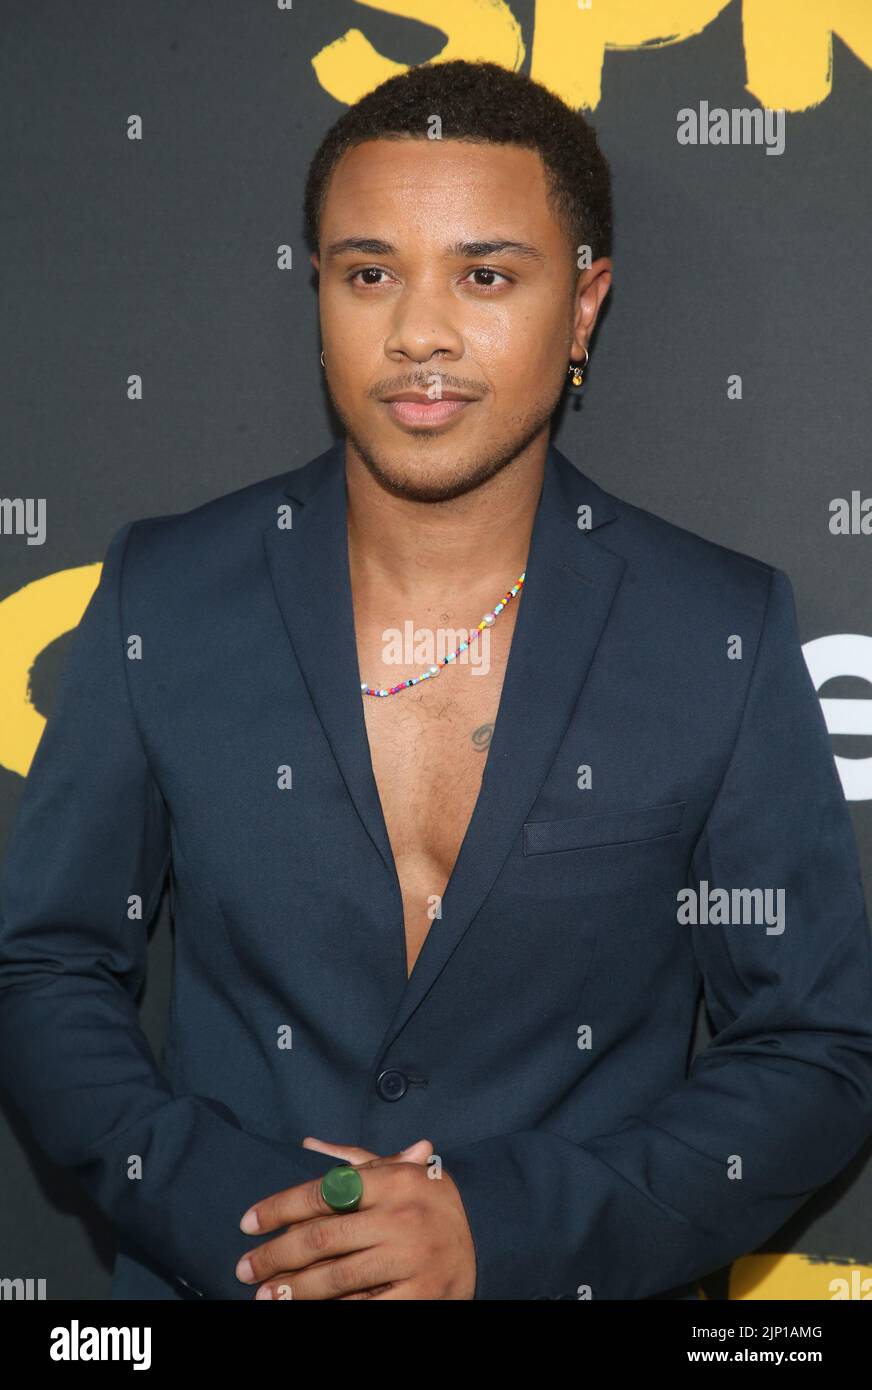 Los Angeles, California, USA. 14th Aug, 2022. Andre Jamal Kinney. Red Carpet Premiere Of Freevee's 'Sprung' held at the Hollywood Forever Cemetery in Los Angeles. Credit: AdMedia Photo via/Newscom/Alamy Live News Stock Photo